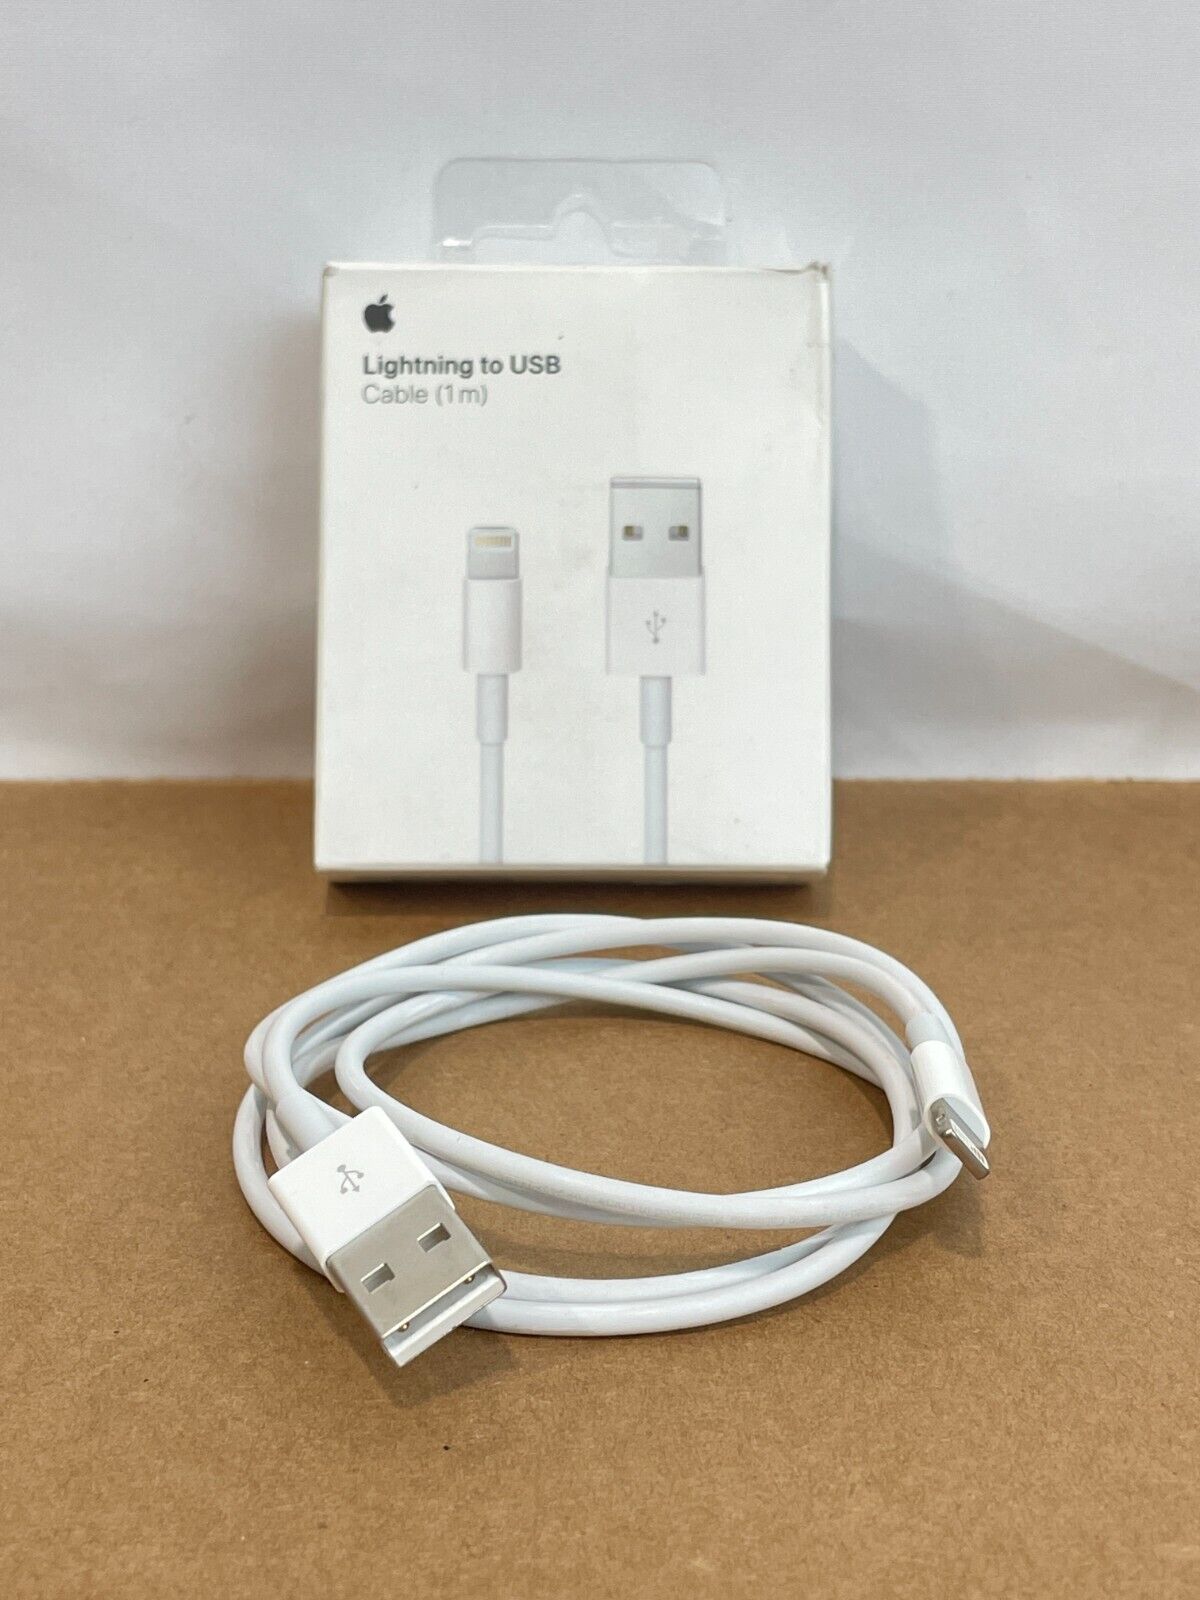 ♥ New, Open - Apple USB Type-A to Lightning Cable 1 Meter (3.3') M – Small Dog Electronics